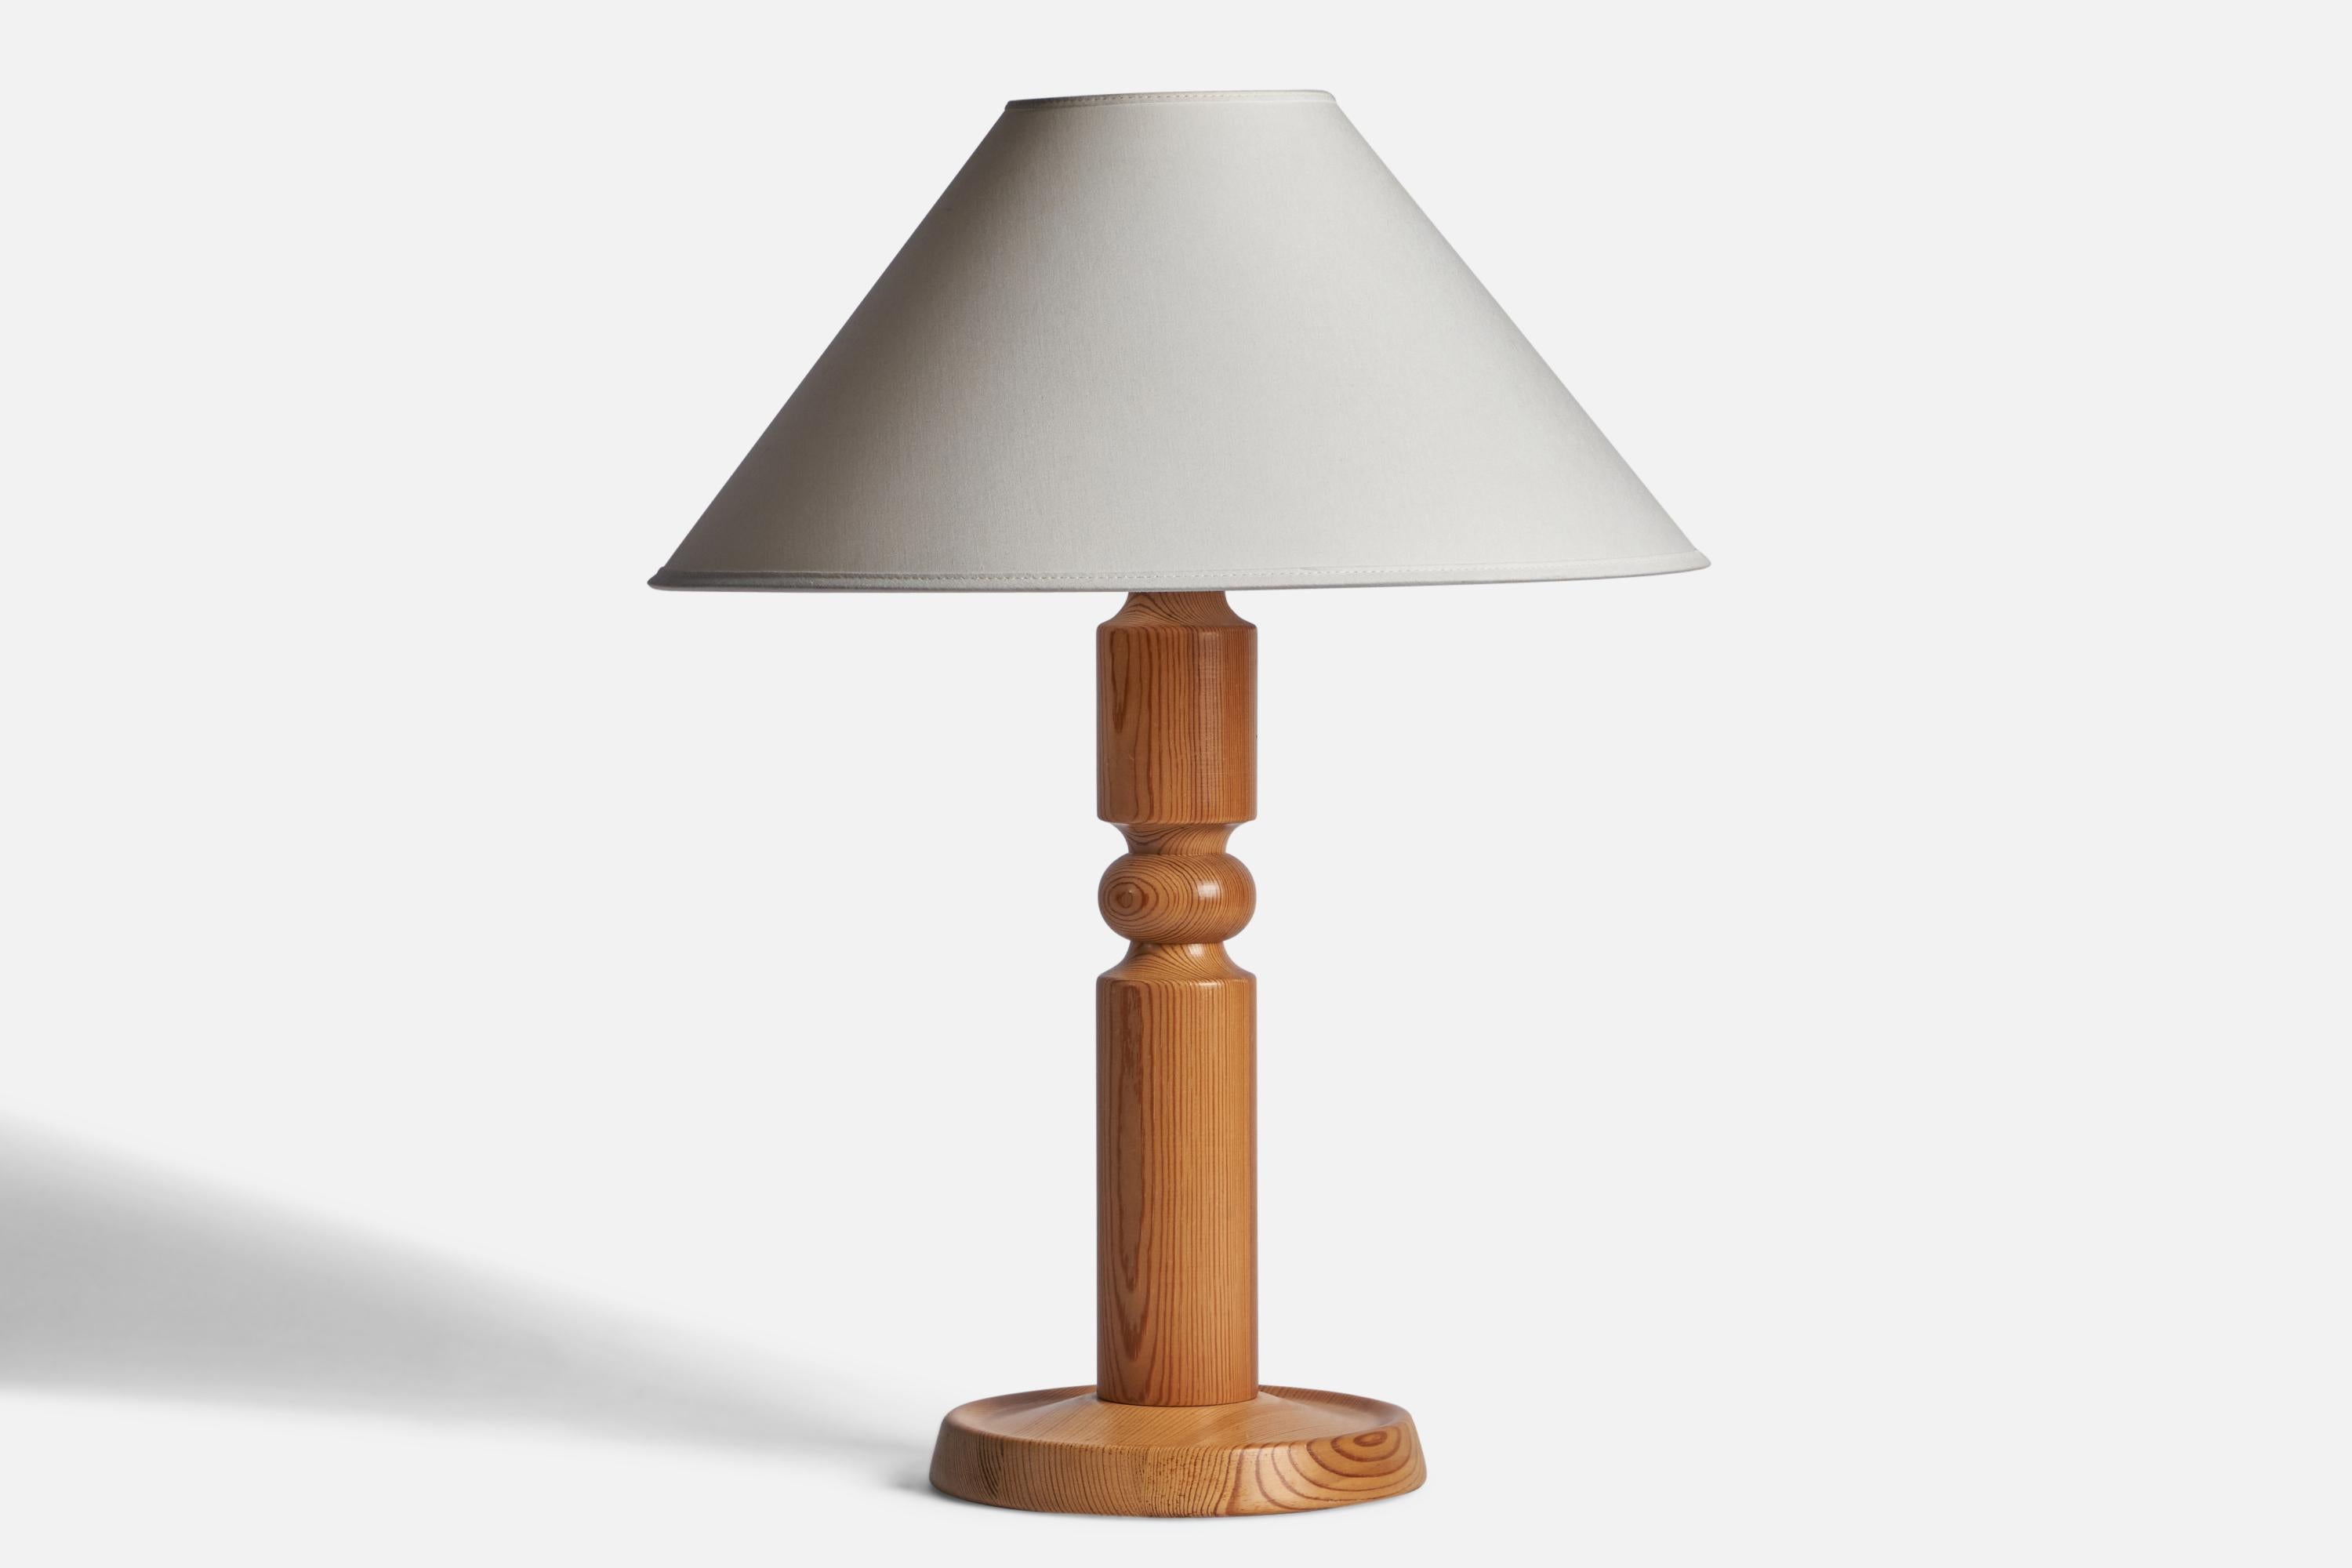 A pine table lamp designed and produced by Solbackens Svarveri, Sweden, 1970s.

Dimensions of Lamp (inches): 16.7” H x 7.5” Diameter
Dimensions of Shade (inches): 4.5” Top Diameter x 16” Bottom Diameter x 7.25” H
Dimensions of Lamp with Shade